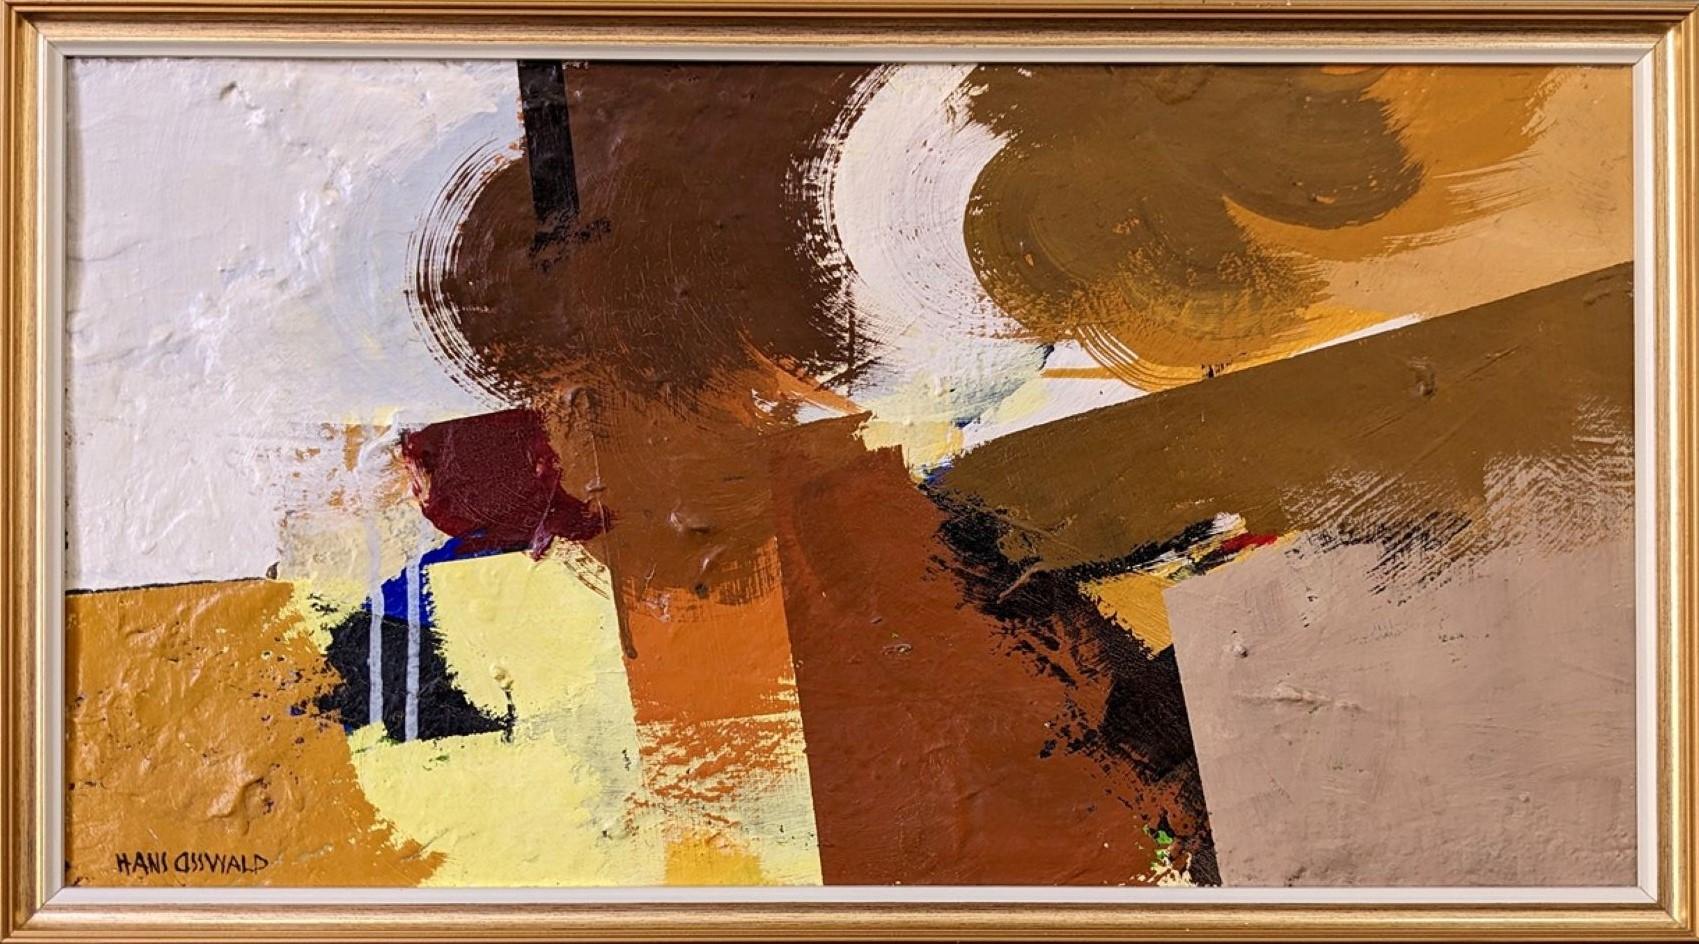 Unknown Abstract Painting - Vintage Mid-Century Oil Painting, Abstract - Autumn Rhapsody, Hans Osswald